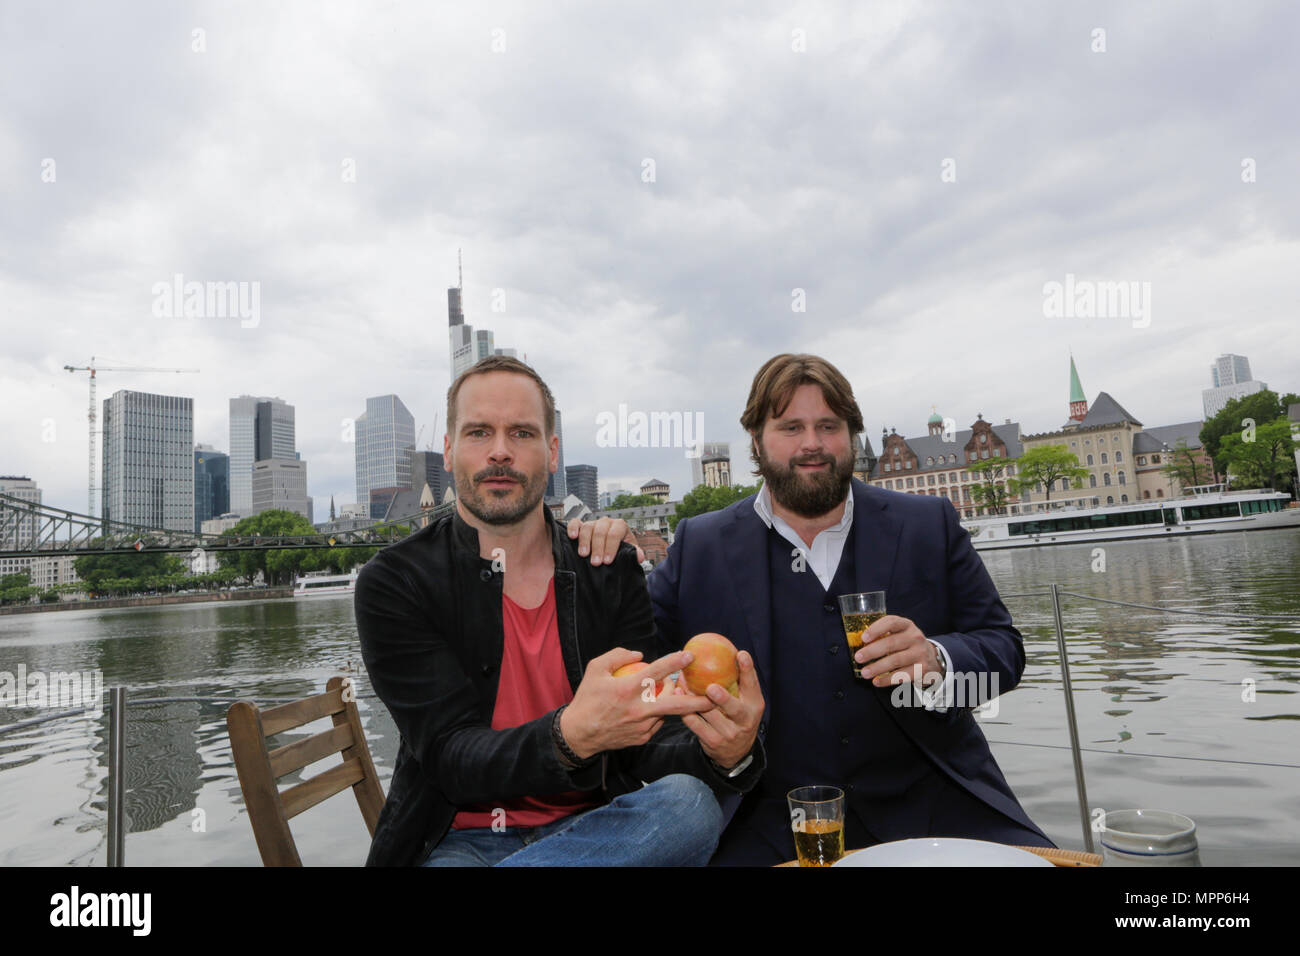 Frankfurt, Germany. 24th May 2018. Actors Wanja Mues (left) and Antoine Monot, Jr. (right) pose on the terrace of the houseboat that is owned by Mues' character Leo in the TV show with two glasses of cider and a Bembel (a local type of stoneware jug, used for cider).   4 new episodes of the relaunch of the long running TV series 'Ein Fall fuer zwei’ (A case for two) are being filmed in Frankfurt for the German state TV broadcaster ZDF (Zweites Deutsches Fernsehen). It stars Antoine Monot, Jr. as defence attorney Benjamin ‘Benni’ Hornberg and Wanja Mues as private investigator Leo Oswald. The e Stock Photo